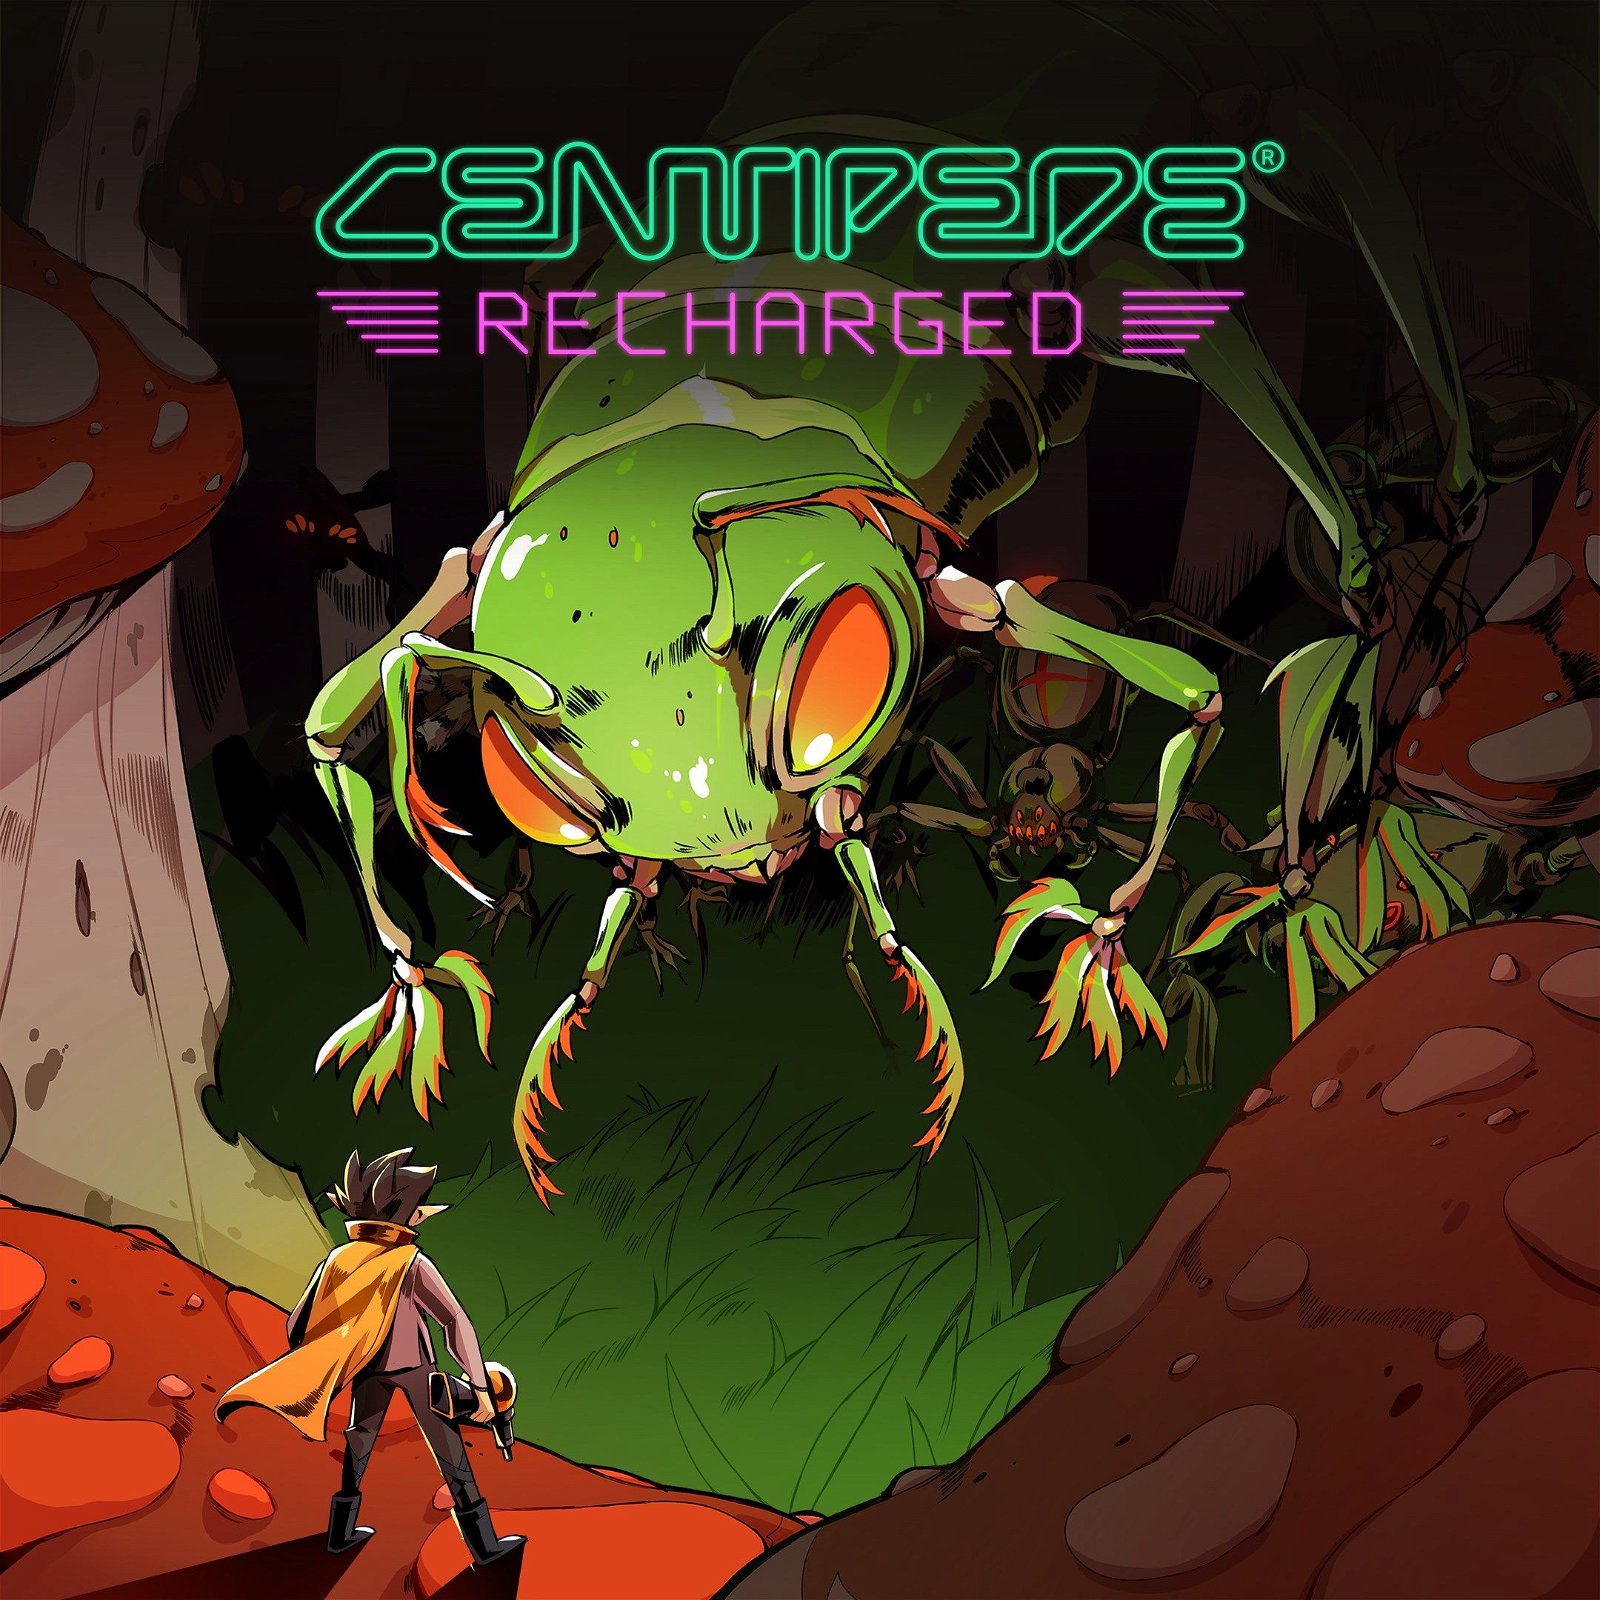 Image of Centipede: Recharged